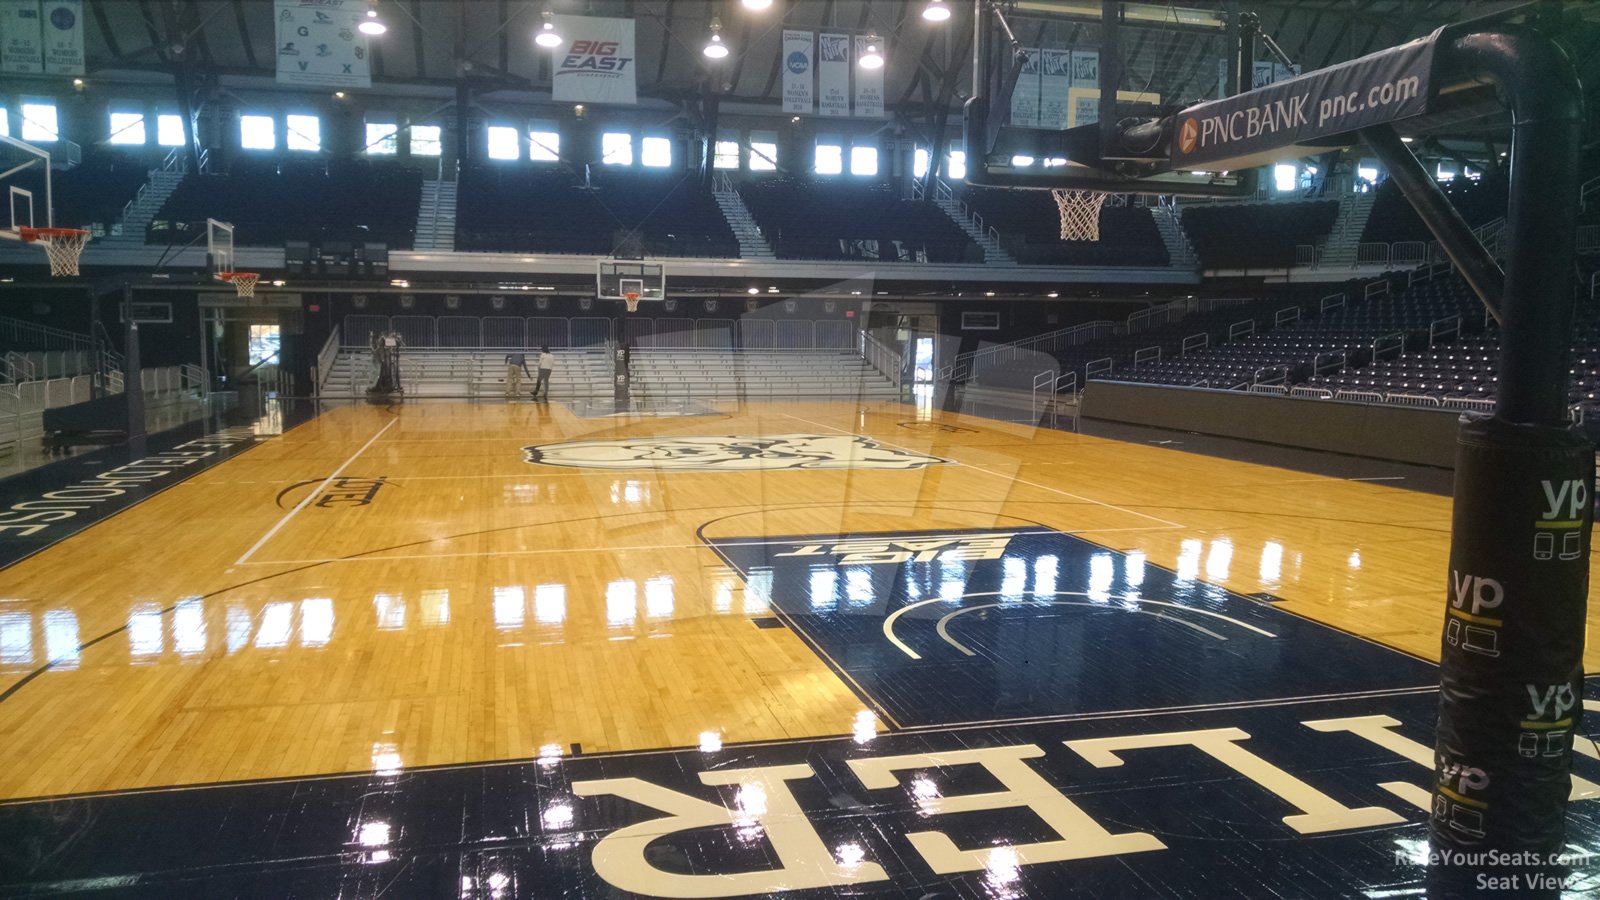 section 112, row 2 seat view  - hinkle fieldhouse